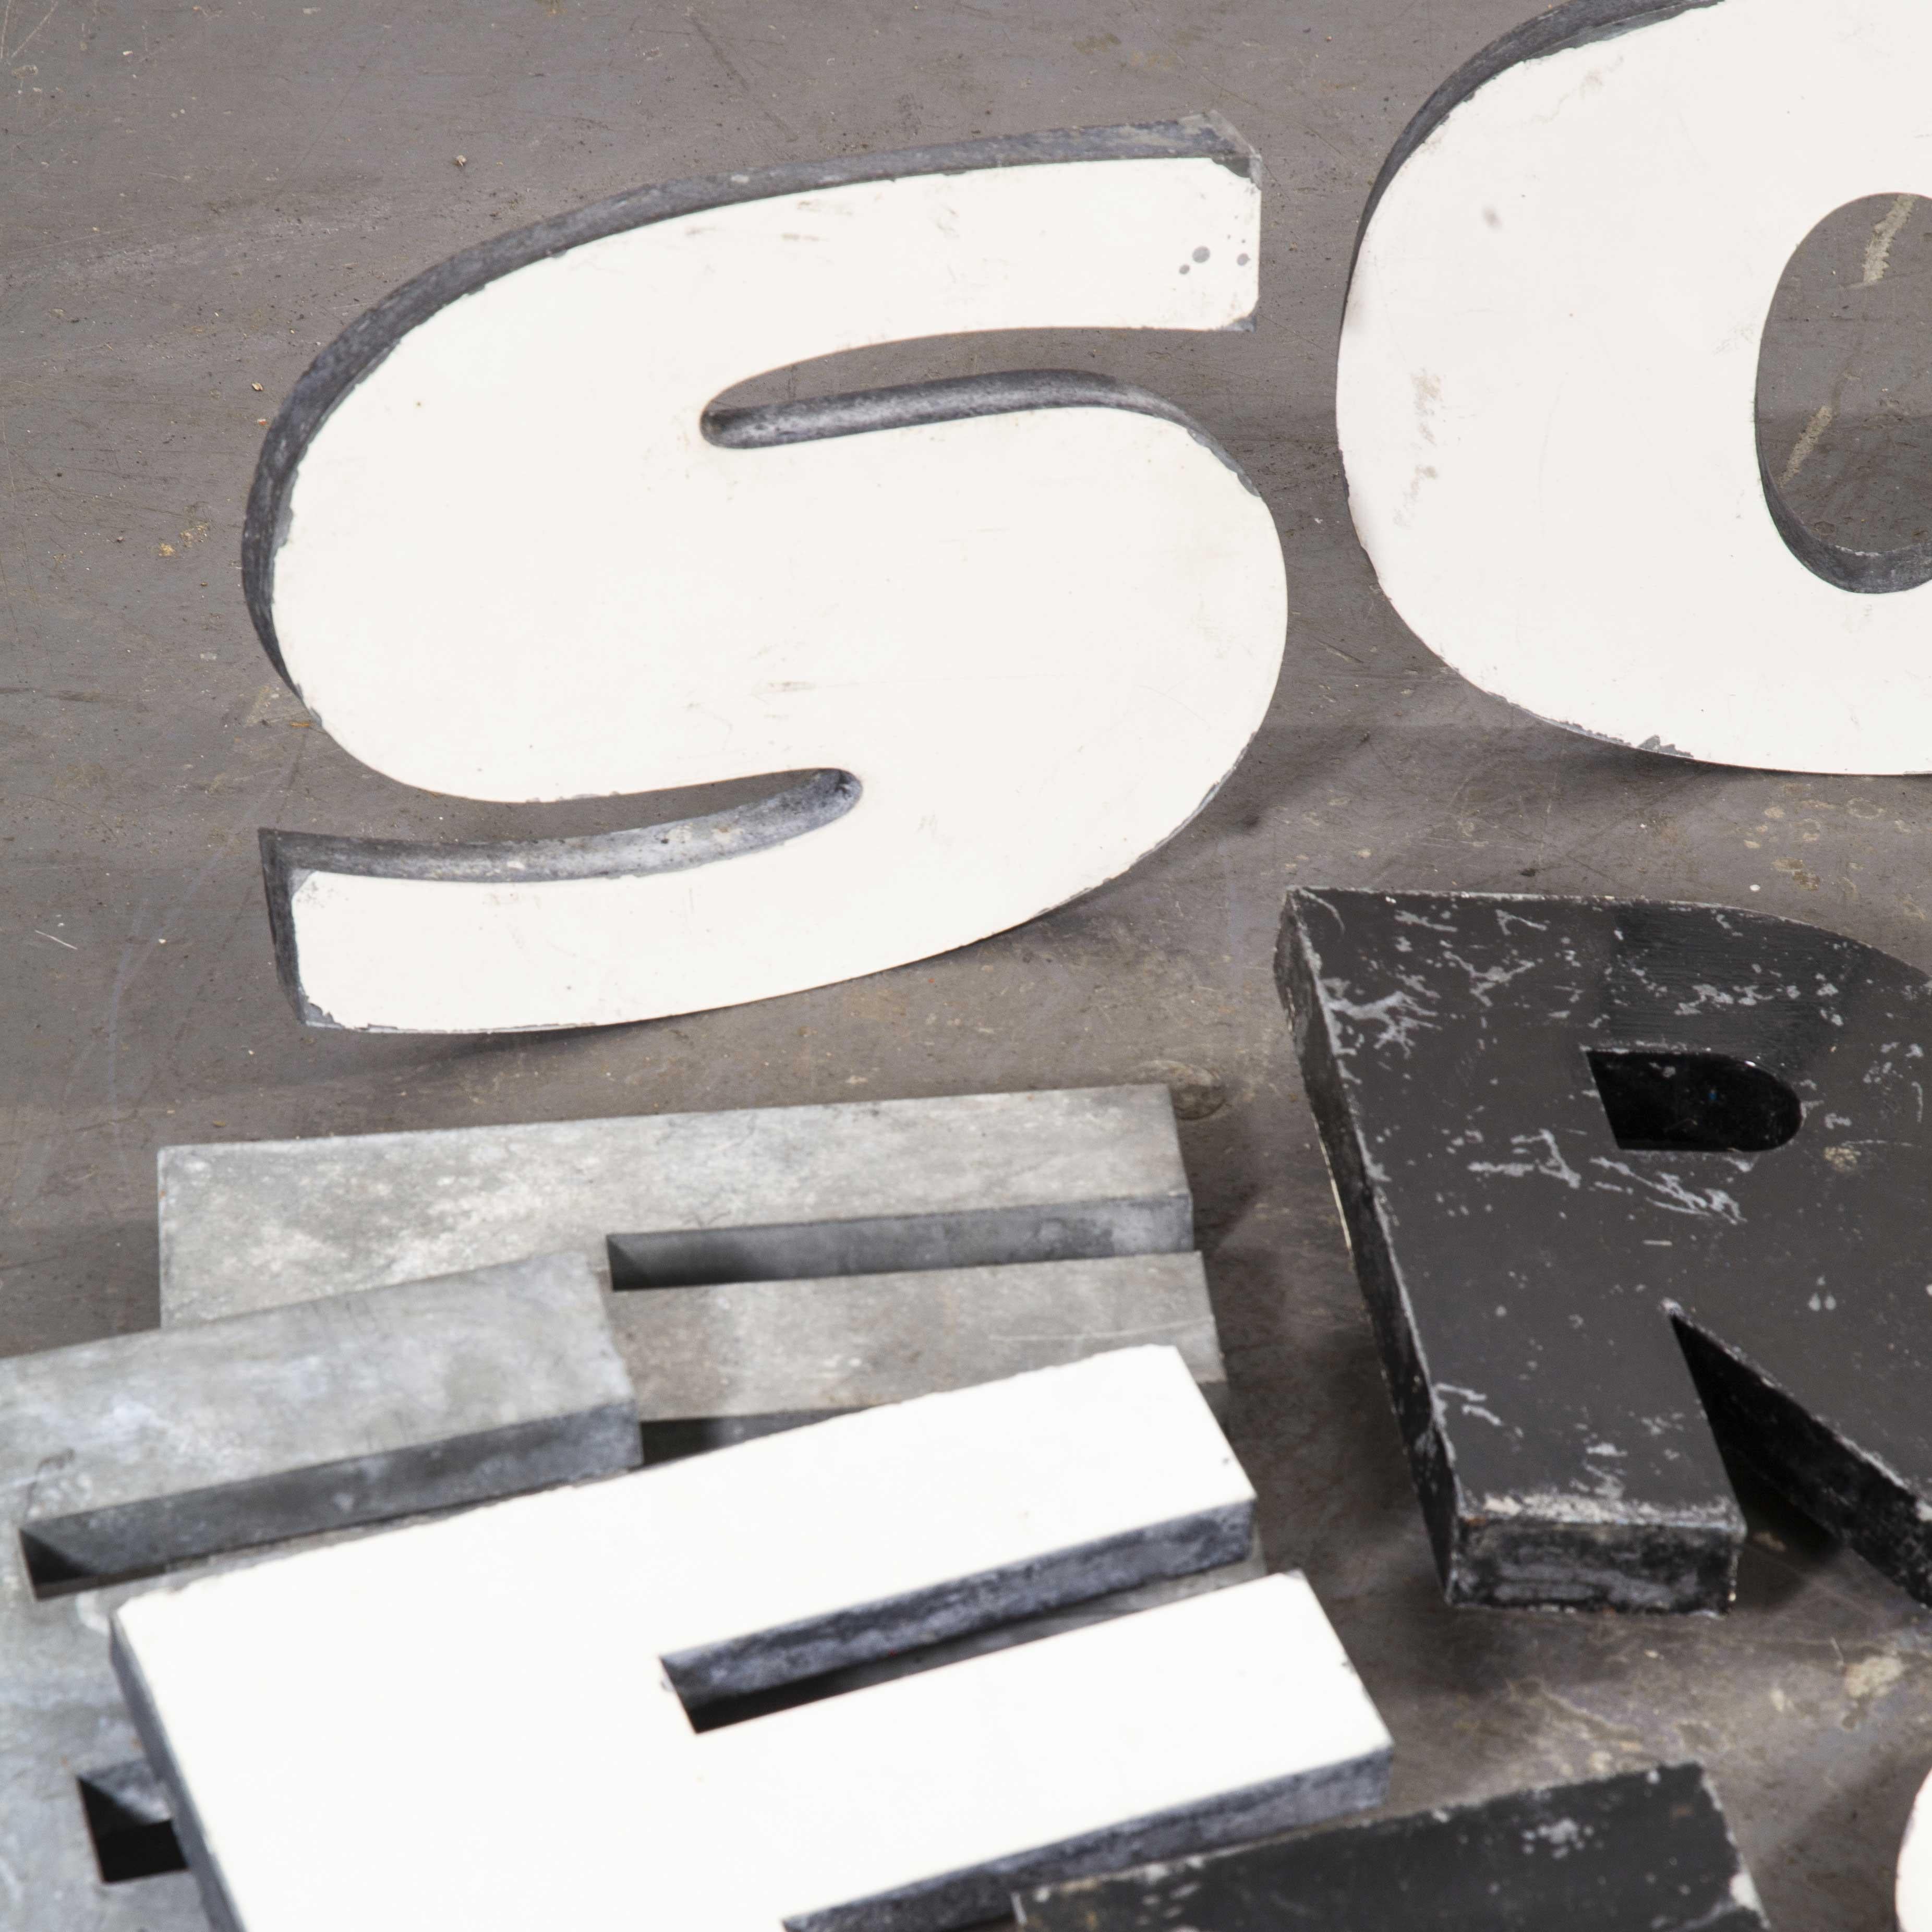 1950s French Zinc letters – Letter Black R

1950s French zinc letters – Letter Black R. We have 19 of these well worn and very beautiful zinc letters which look beautiful as decorative pieces in their own right or are frequently bought as customer